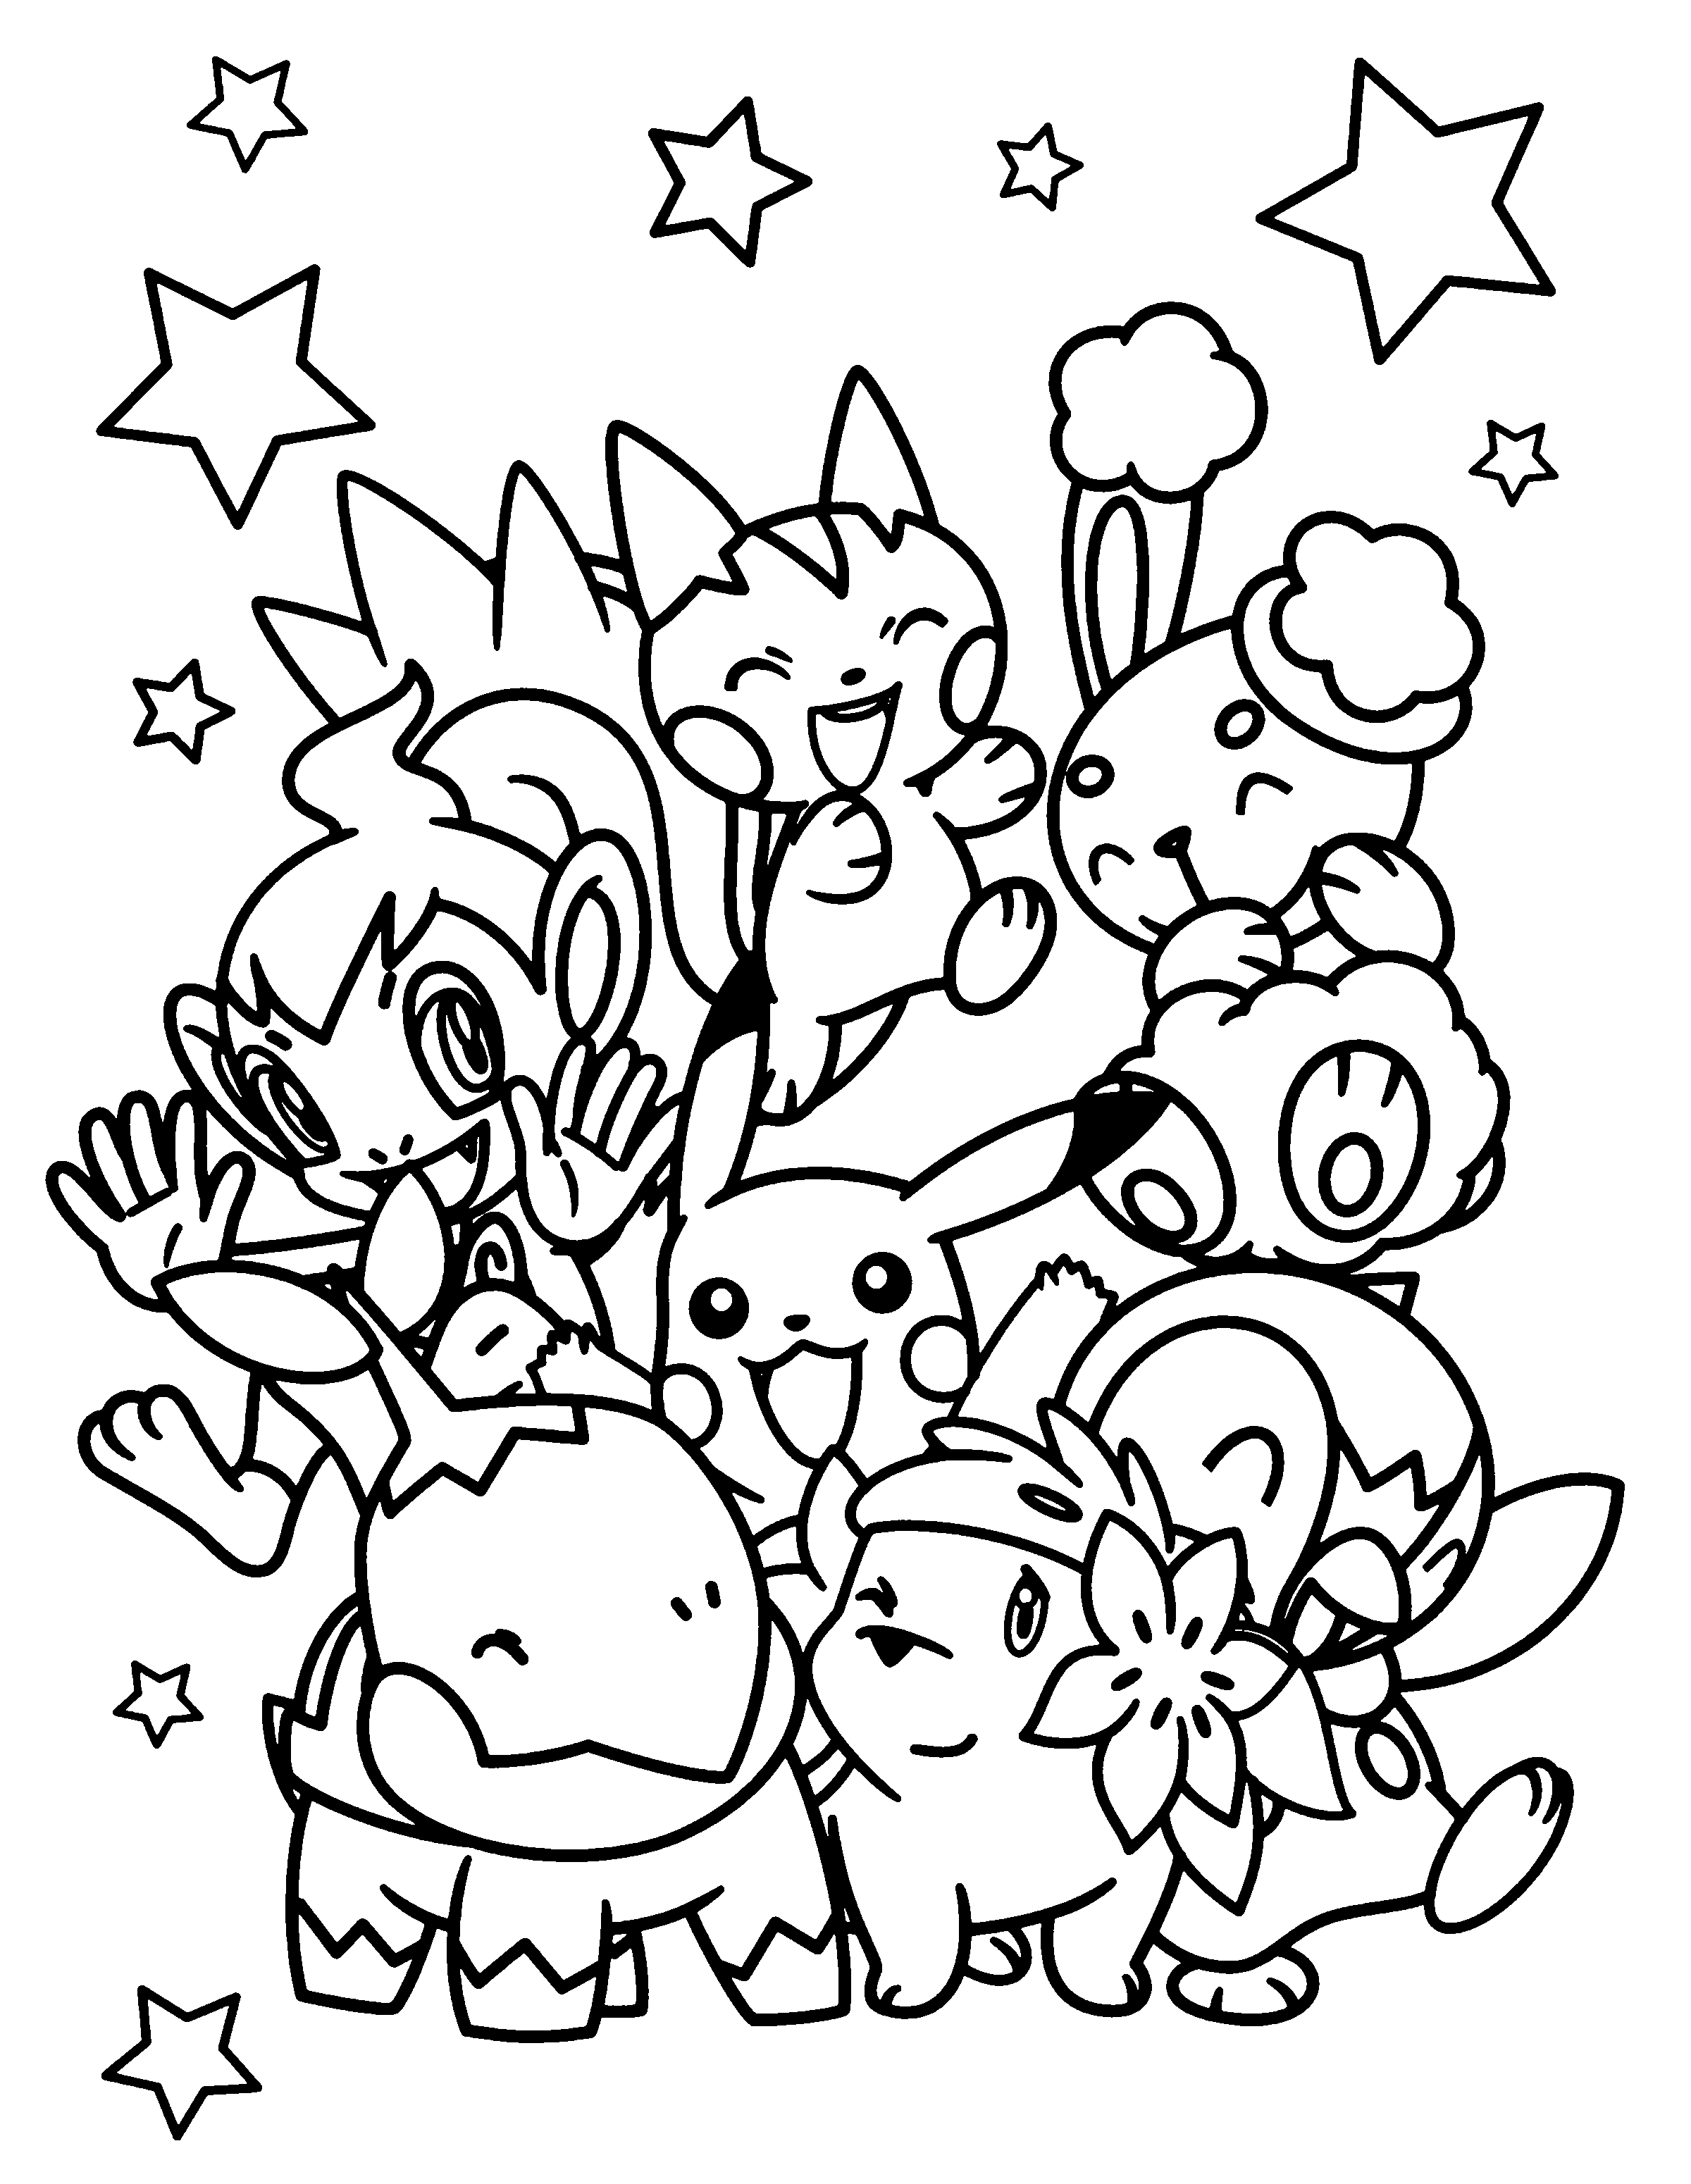 55-pokemon-coloring-pages-for-kids